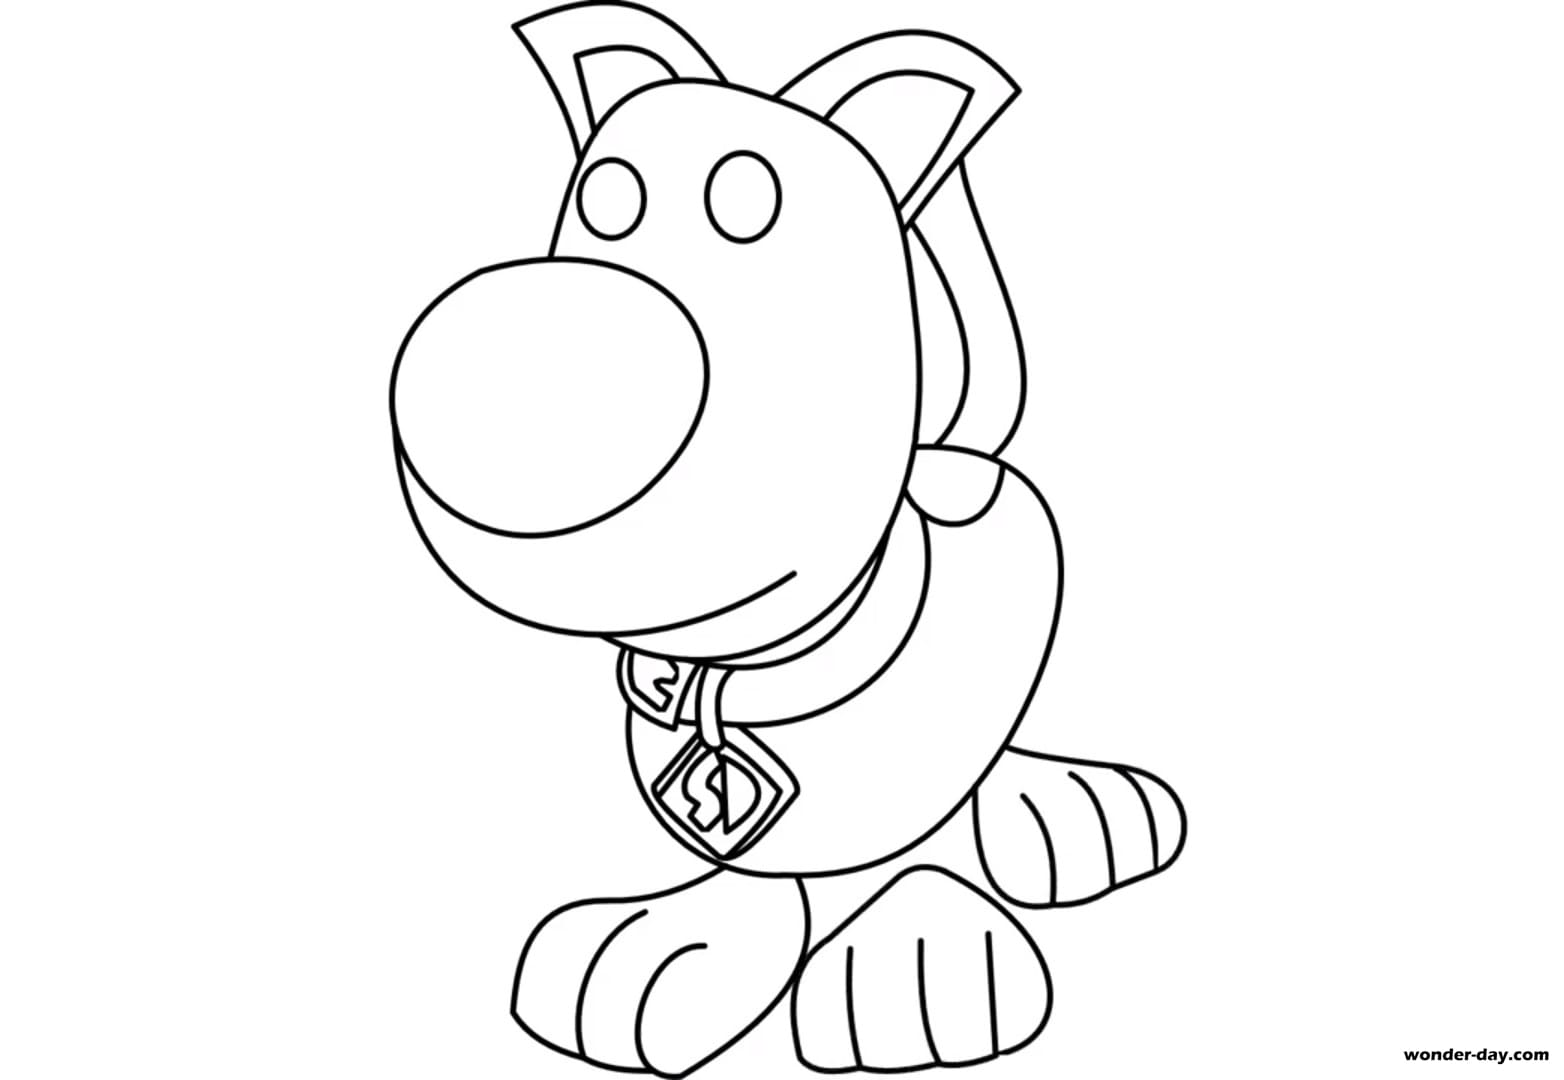 Adopt Me Coloring Pages Coloring Home - roblox adopt me coloring pages printable